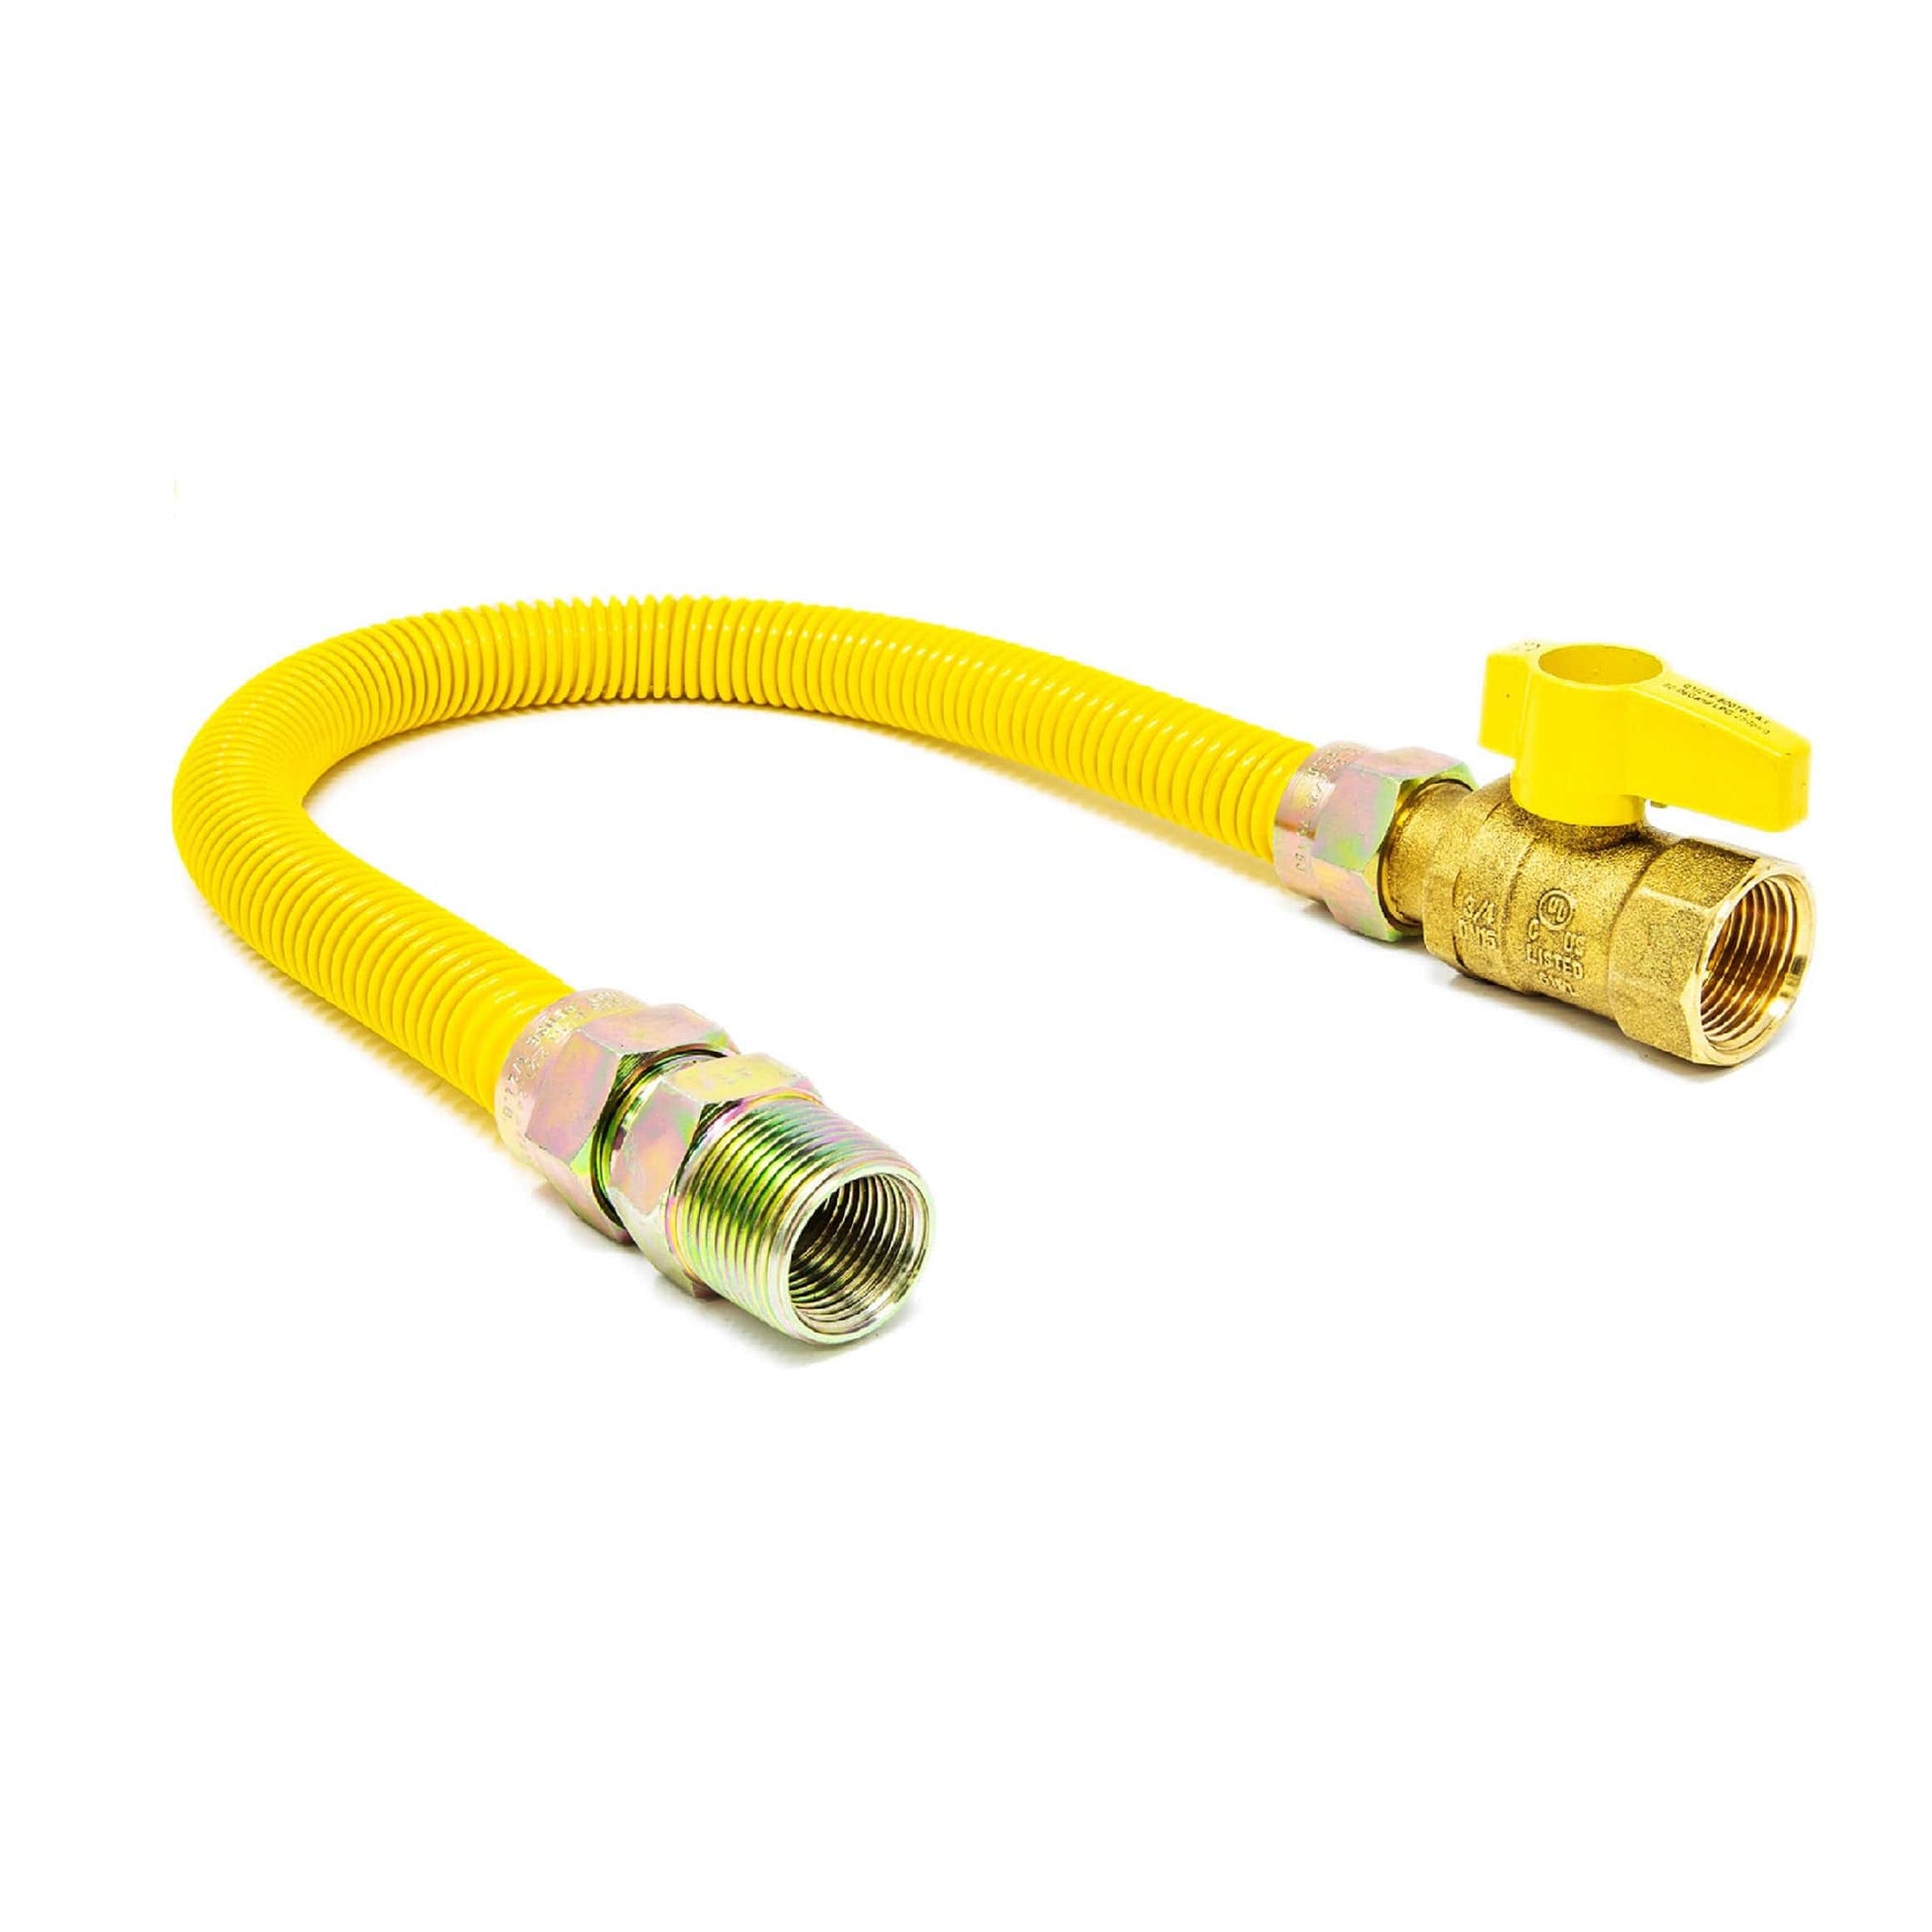 Gas Flex 1/2" OD x 72" Connector 1/2" MIP x 1/2" FIP Straight valve polymer coated 3/8" ID Hose